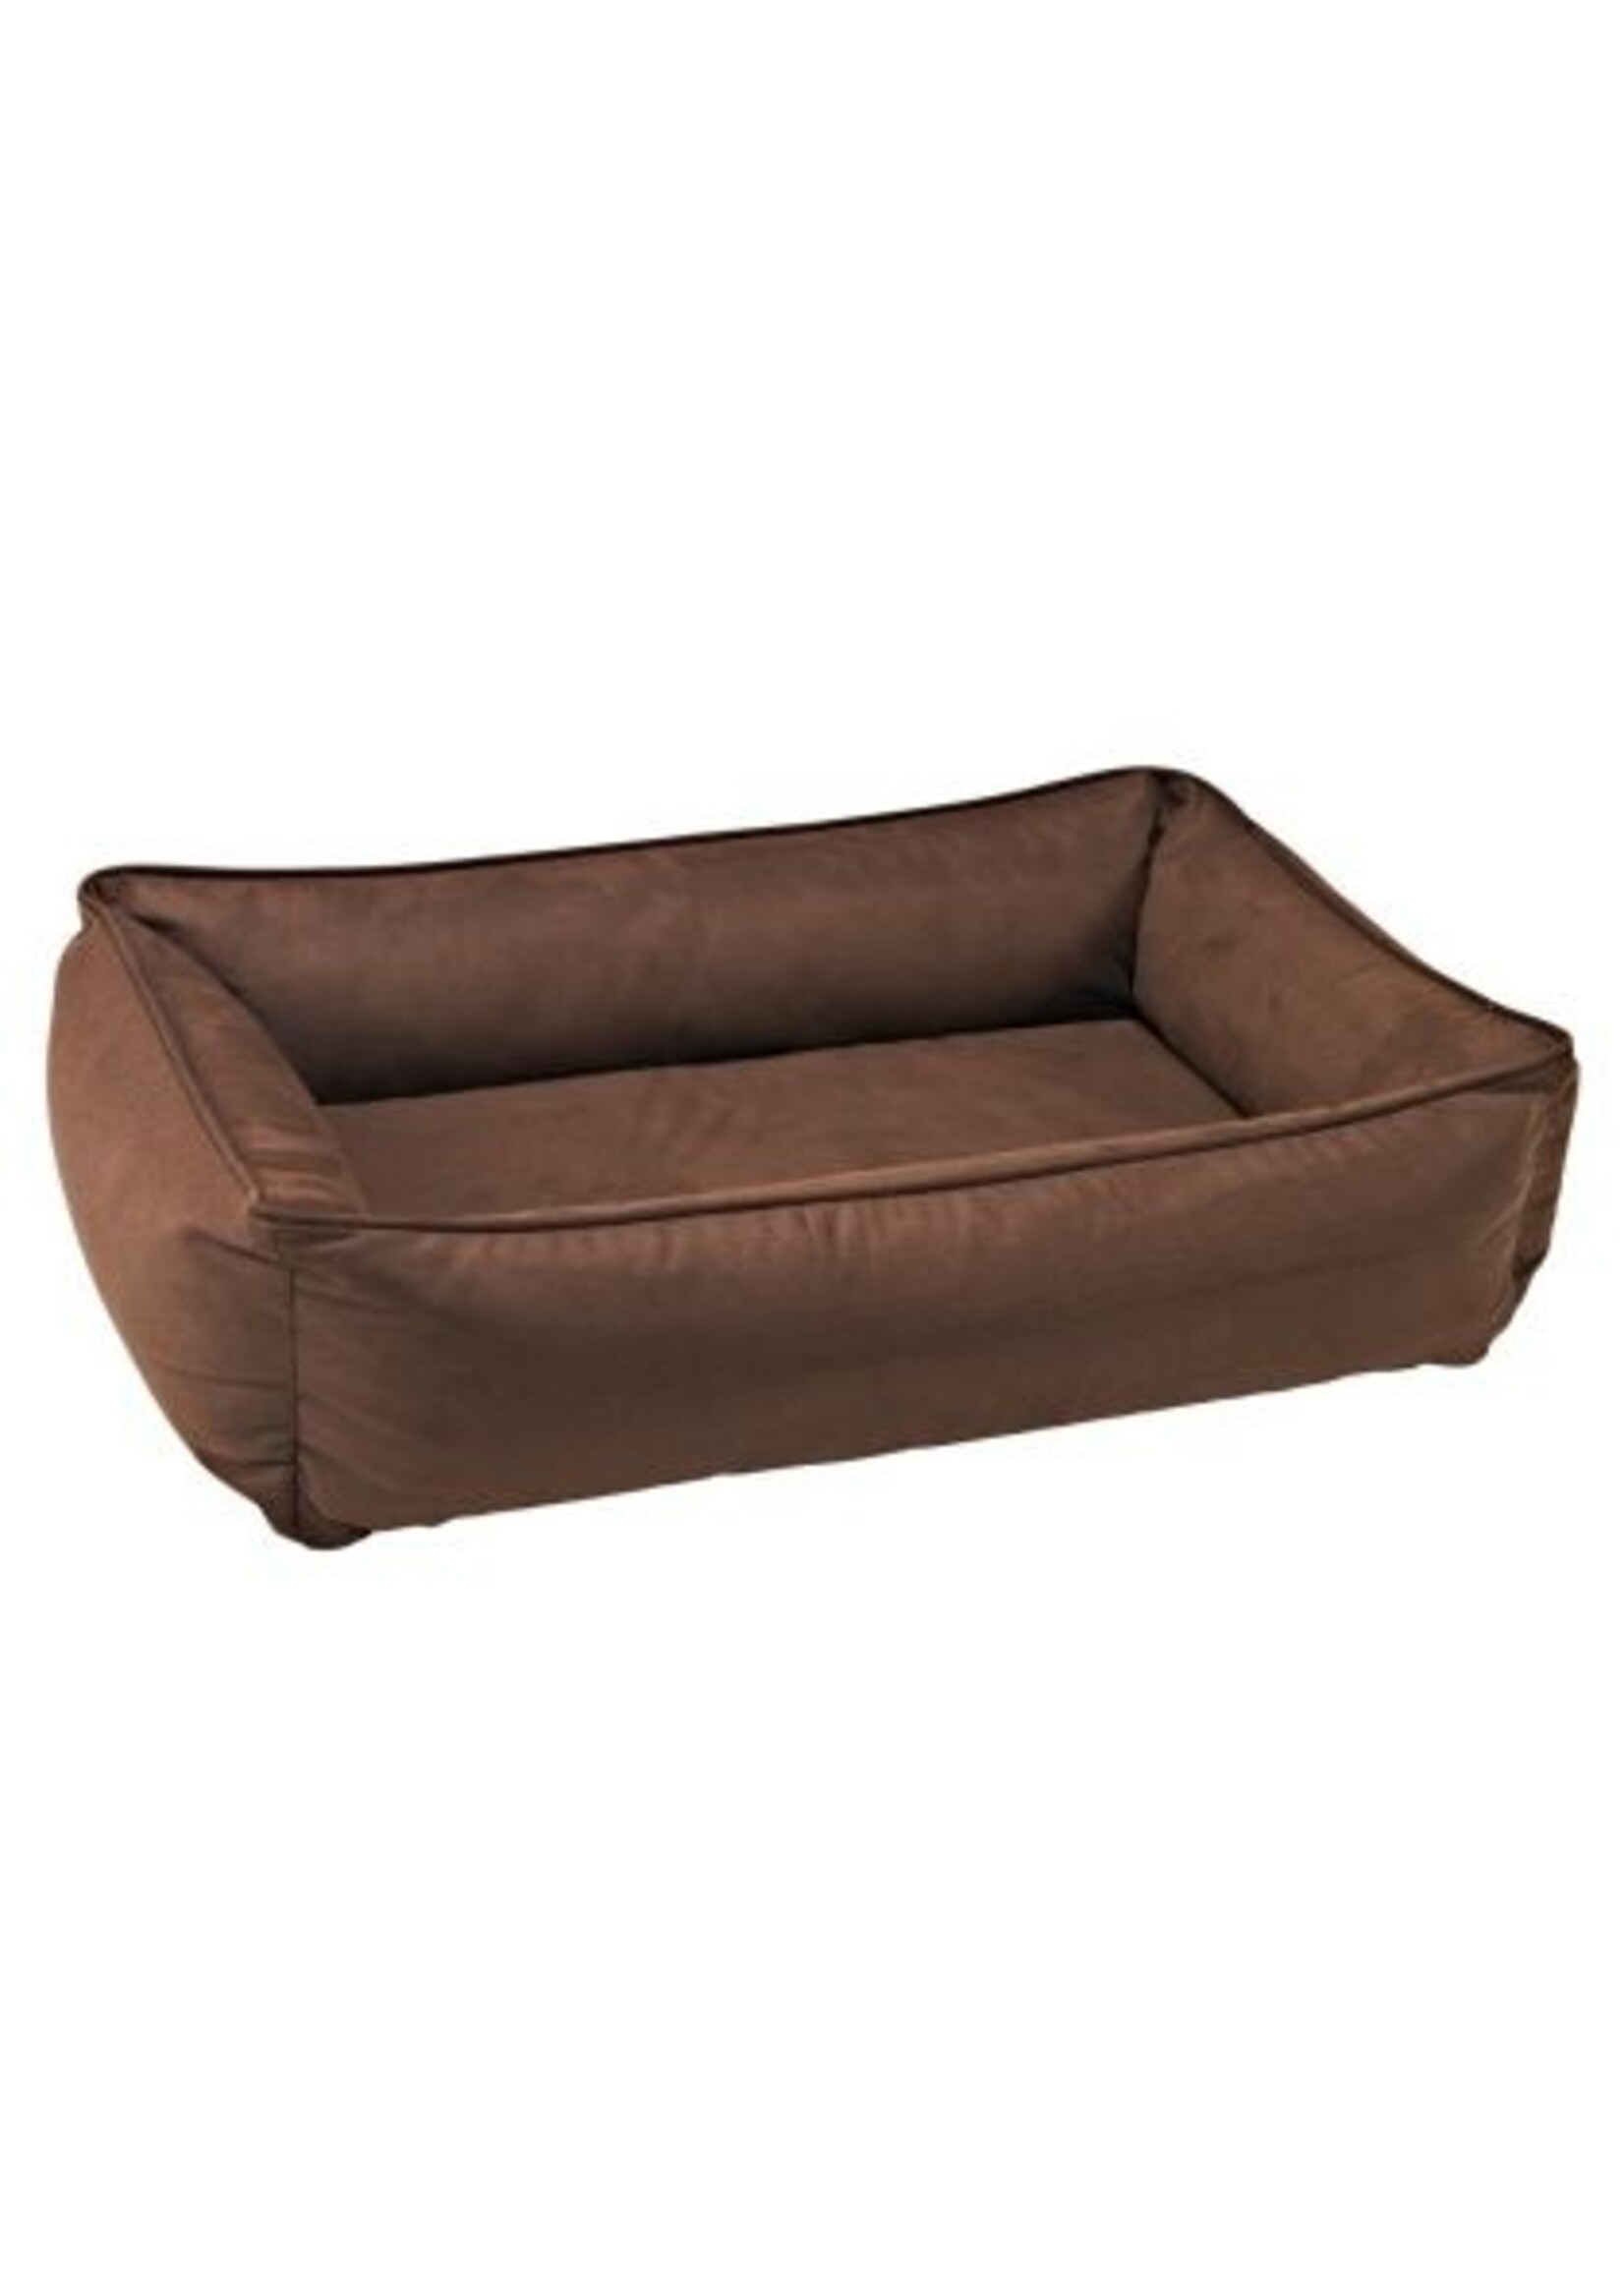 Bowsers Pet Products Bowsers Pet Urban Lounger Faux Leather